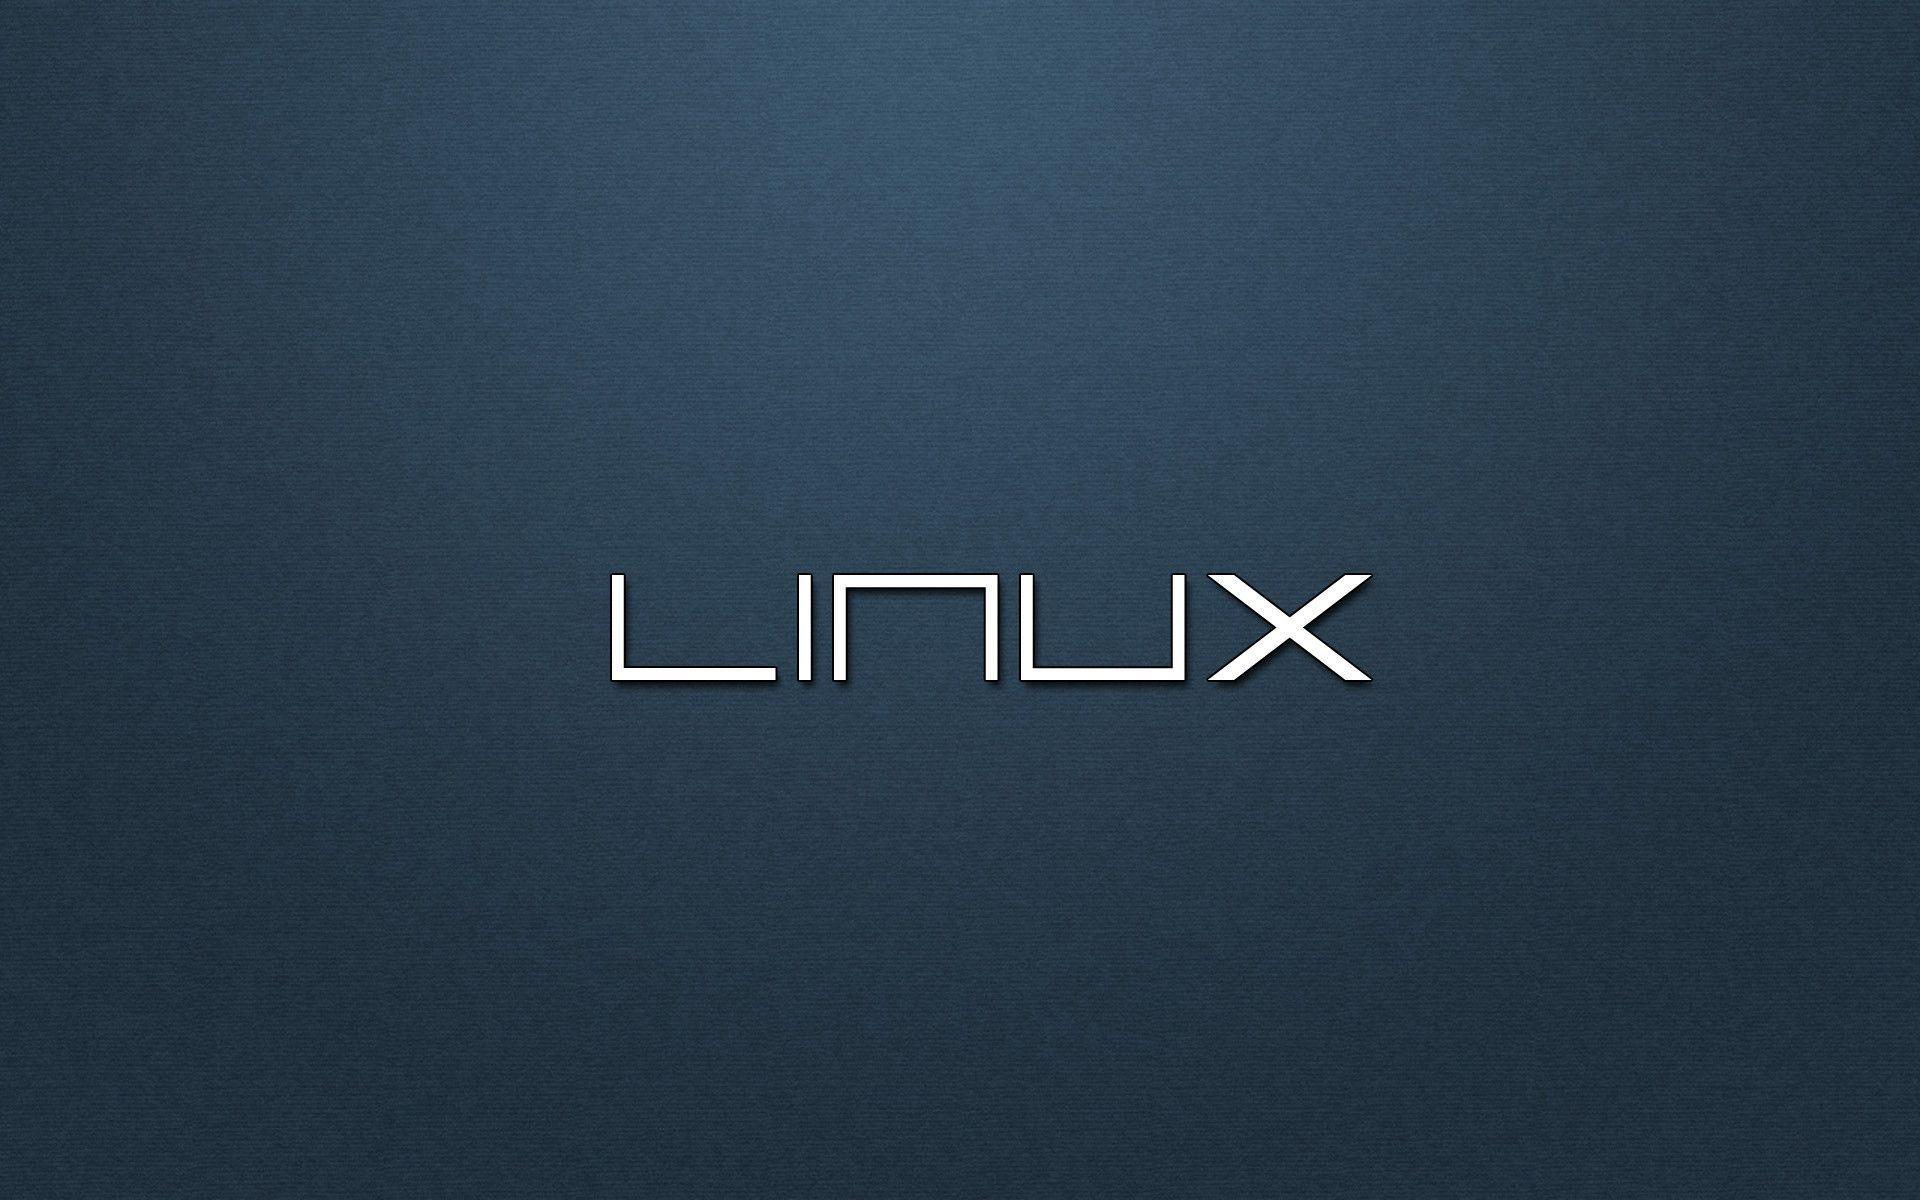 Linux Background wallpaper